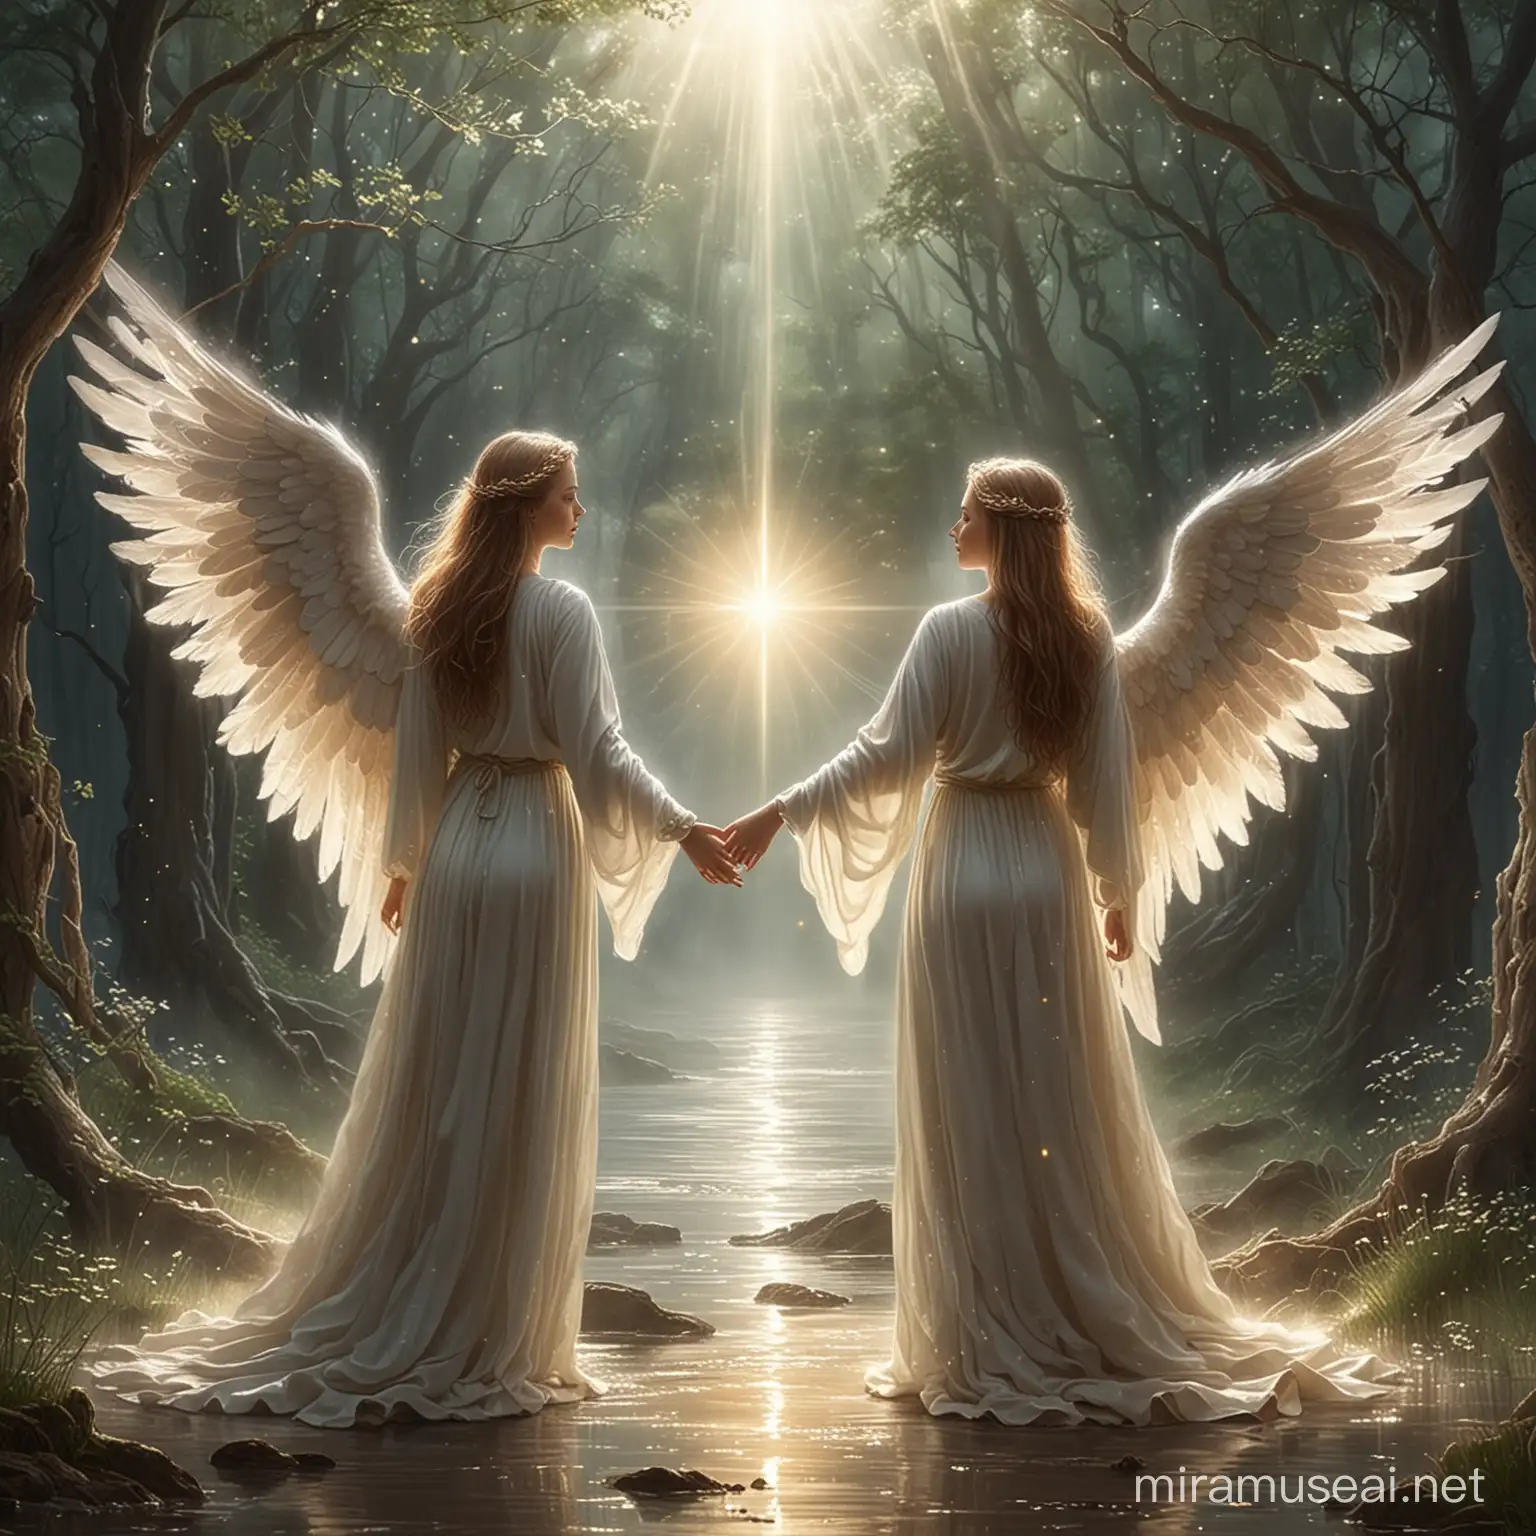 spirituality. seeing light at the end of a storm. transformation. illumination. love. hope. healing. angels and humans together. magical and ethereal 